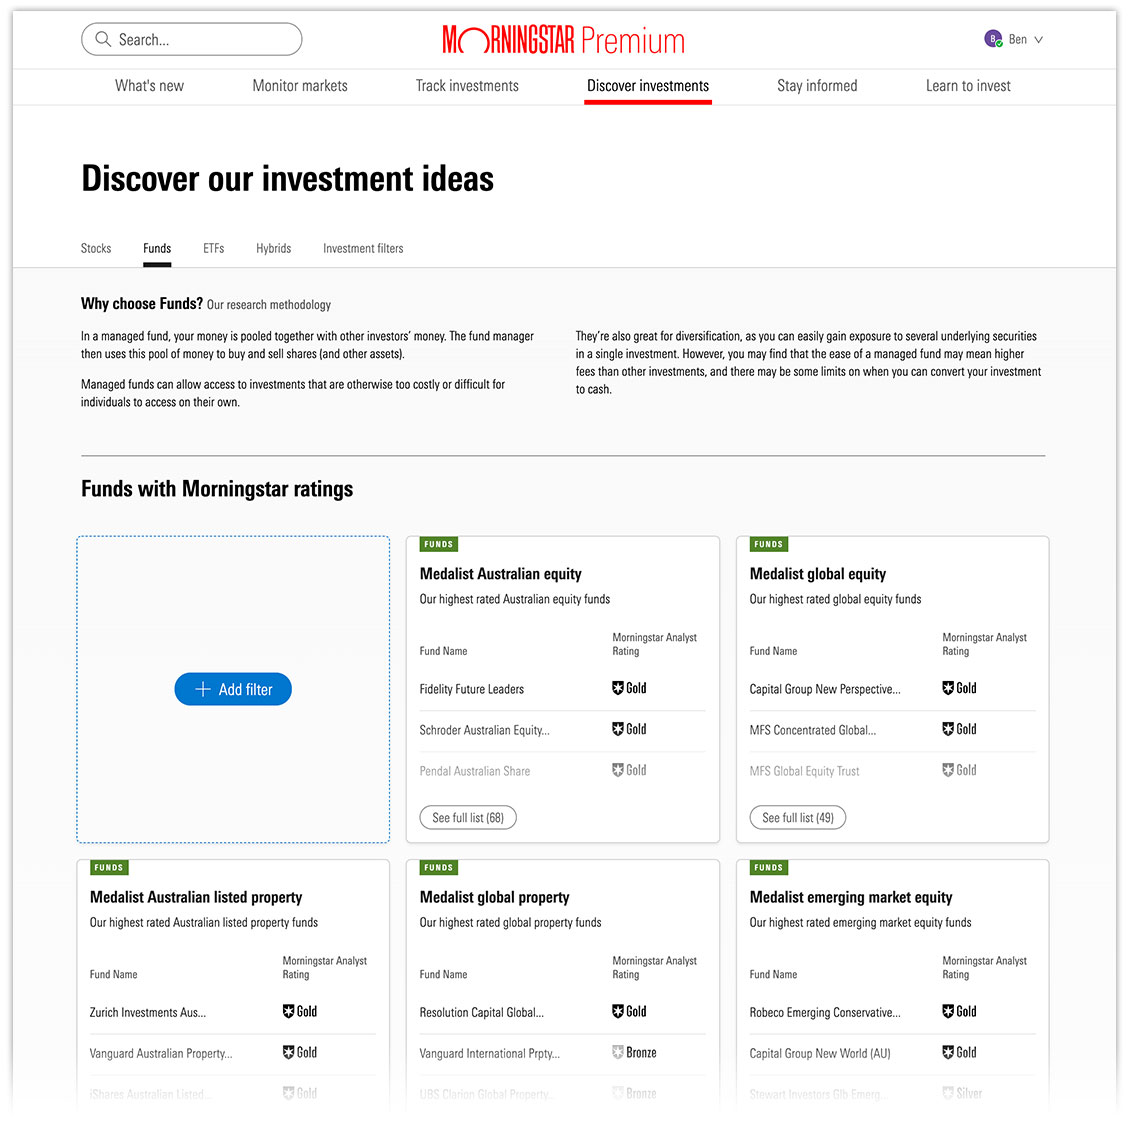 Image of the Discover Investments Funds page